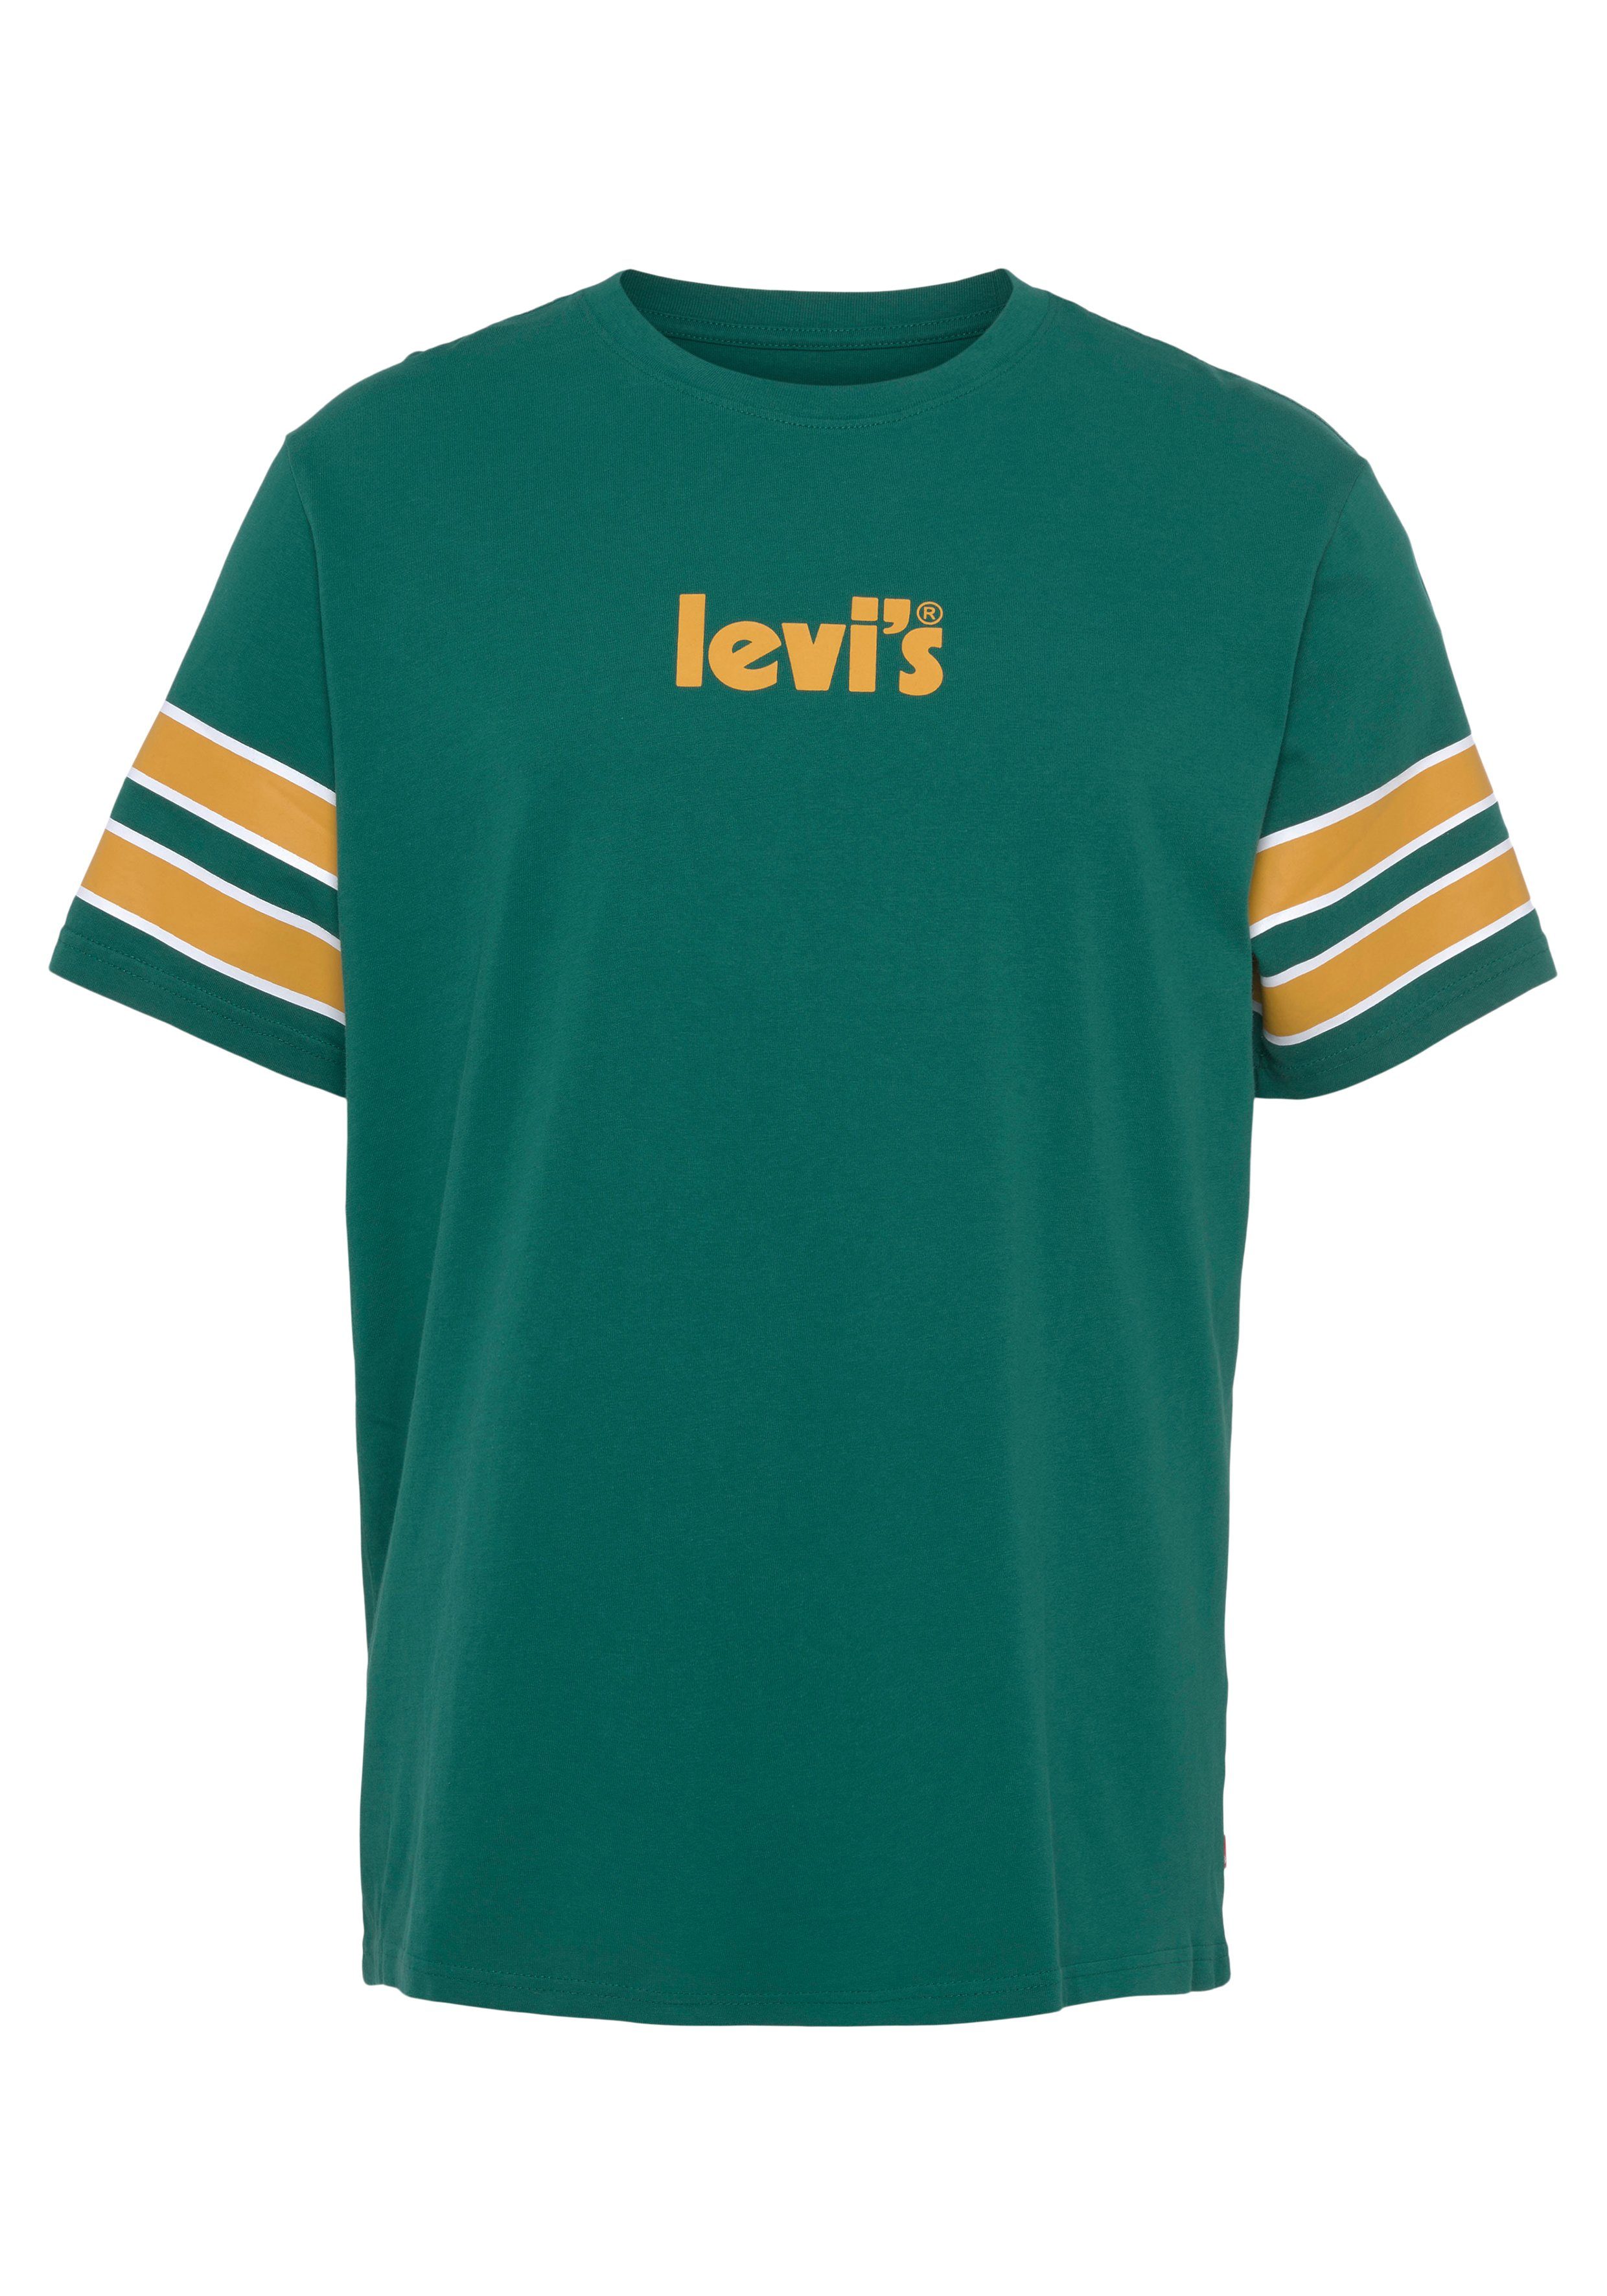 Rundhalsshirt im greens Levi's® RELAXED FIT College-Look TEE